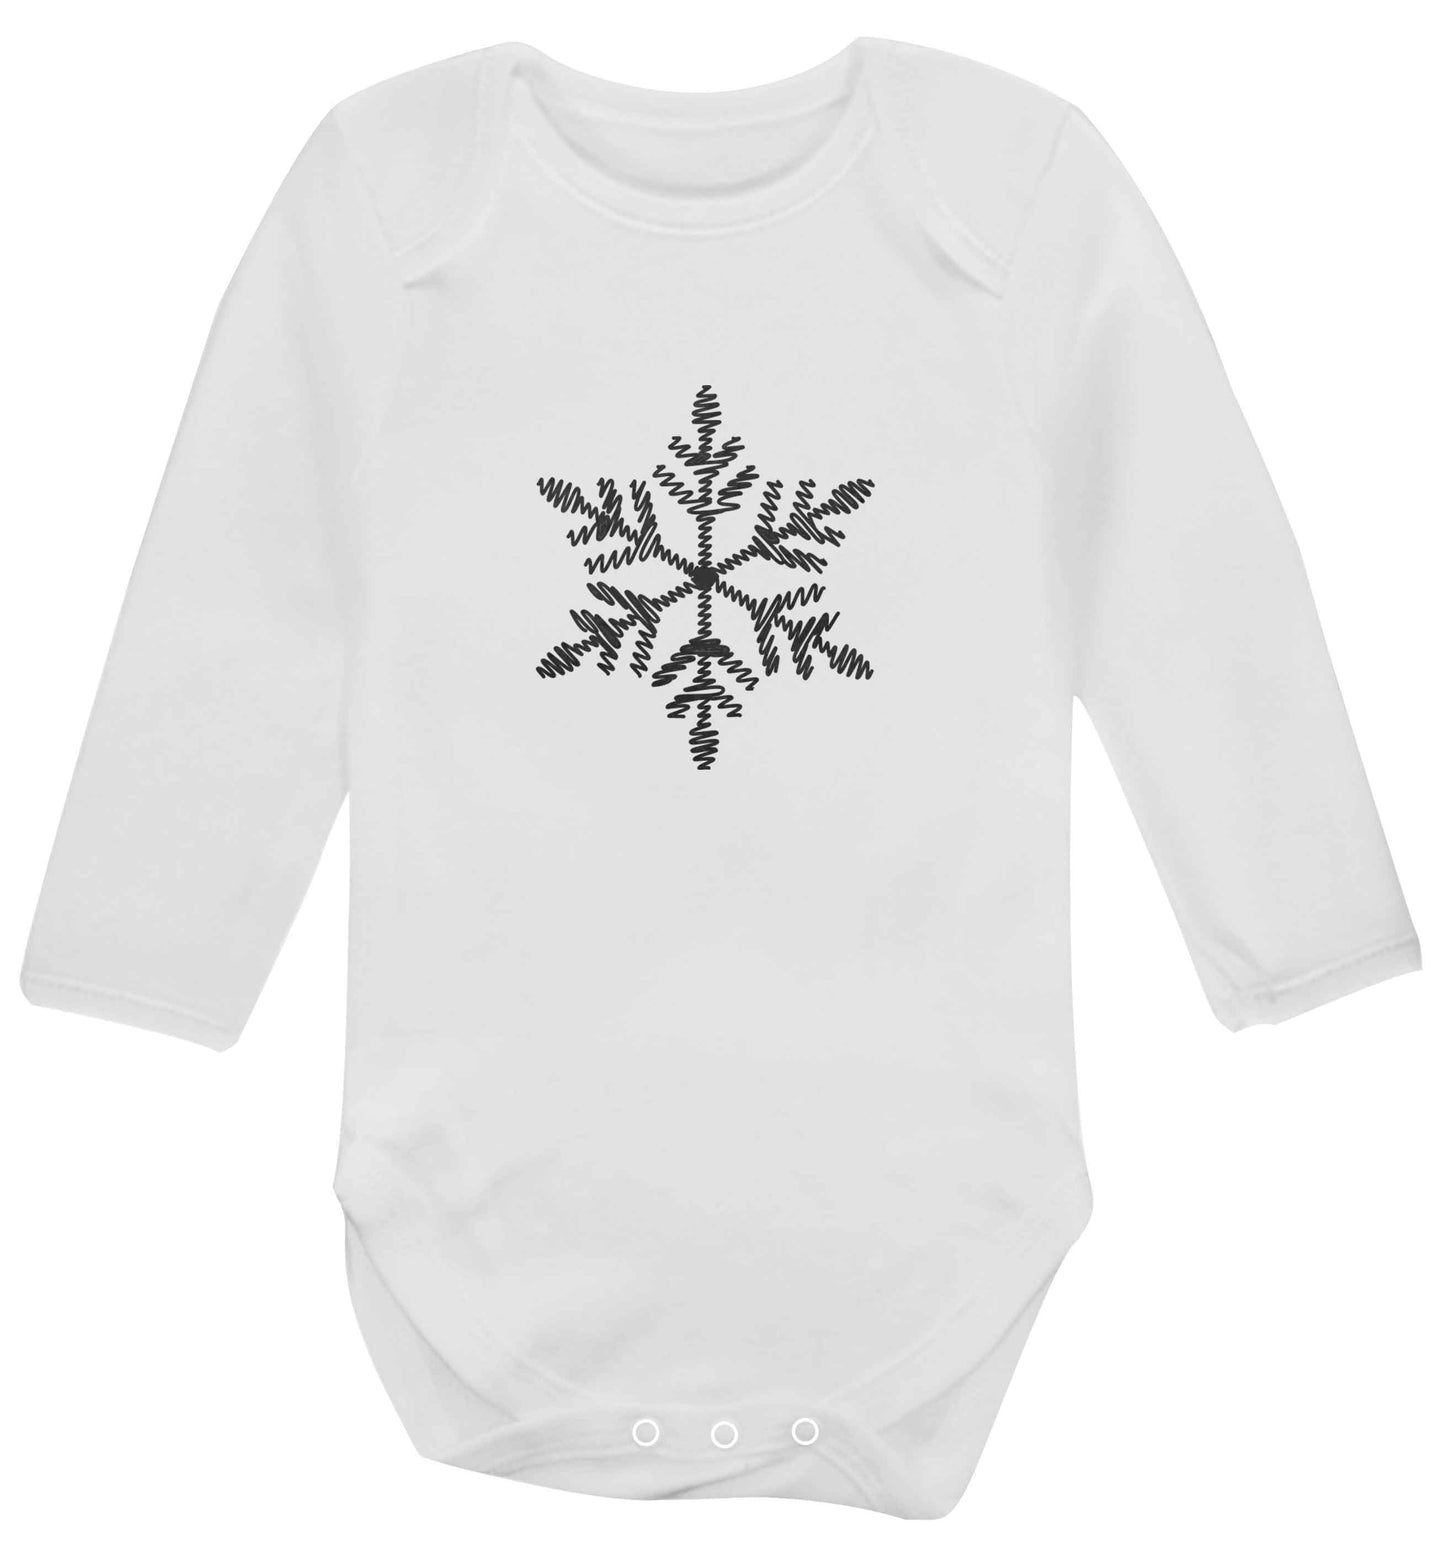 Snowflake baby vest long sleeved white 6-12 months